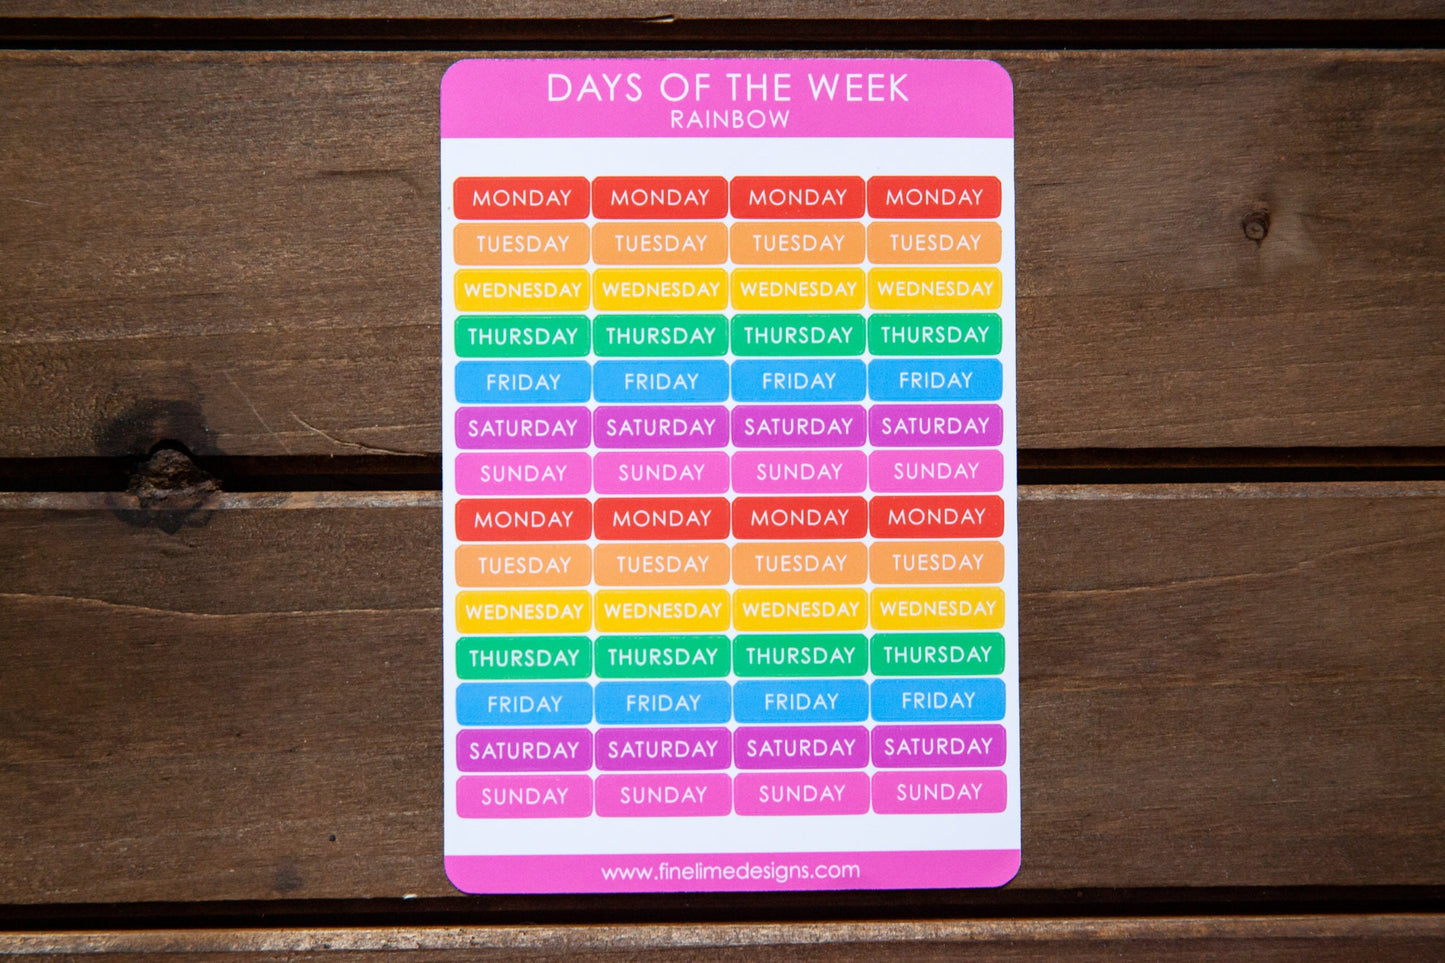 Days of the Week Stickers - Rainbow